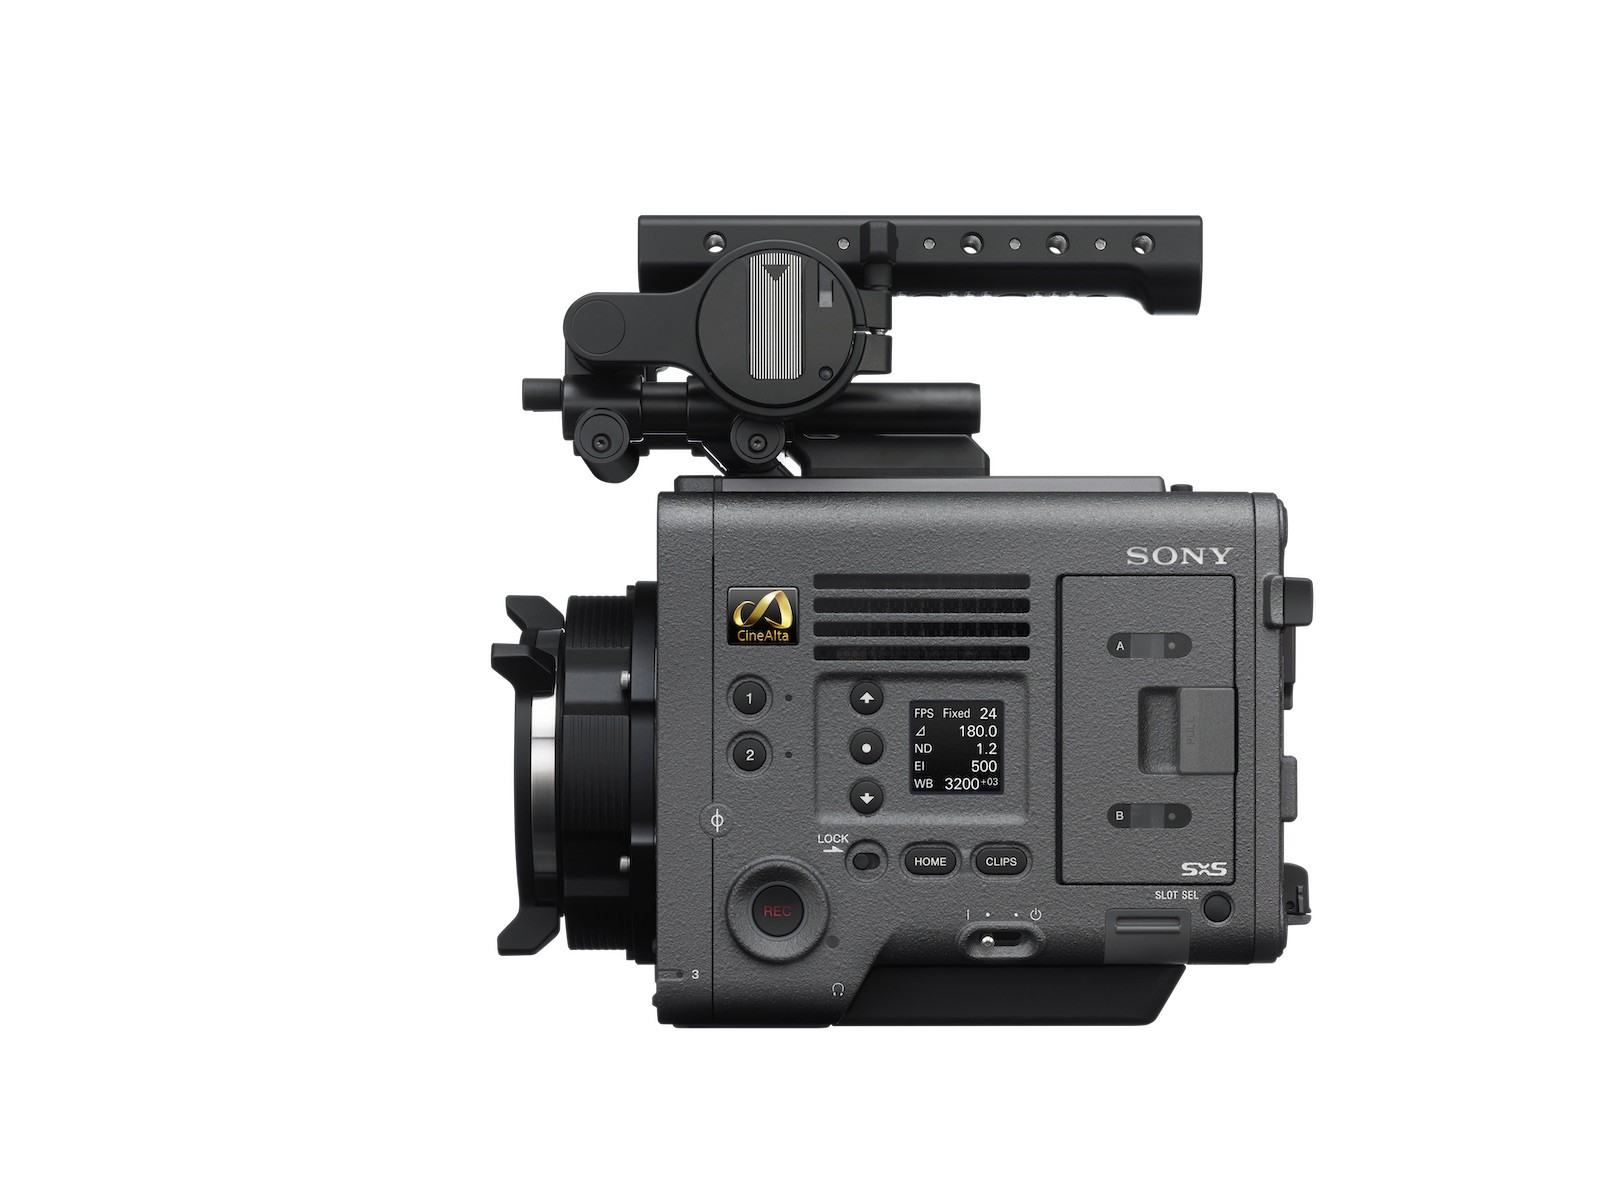 Sony VENICE Shoots at 90FPS in 6K